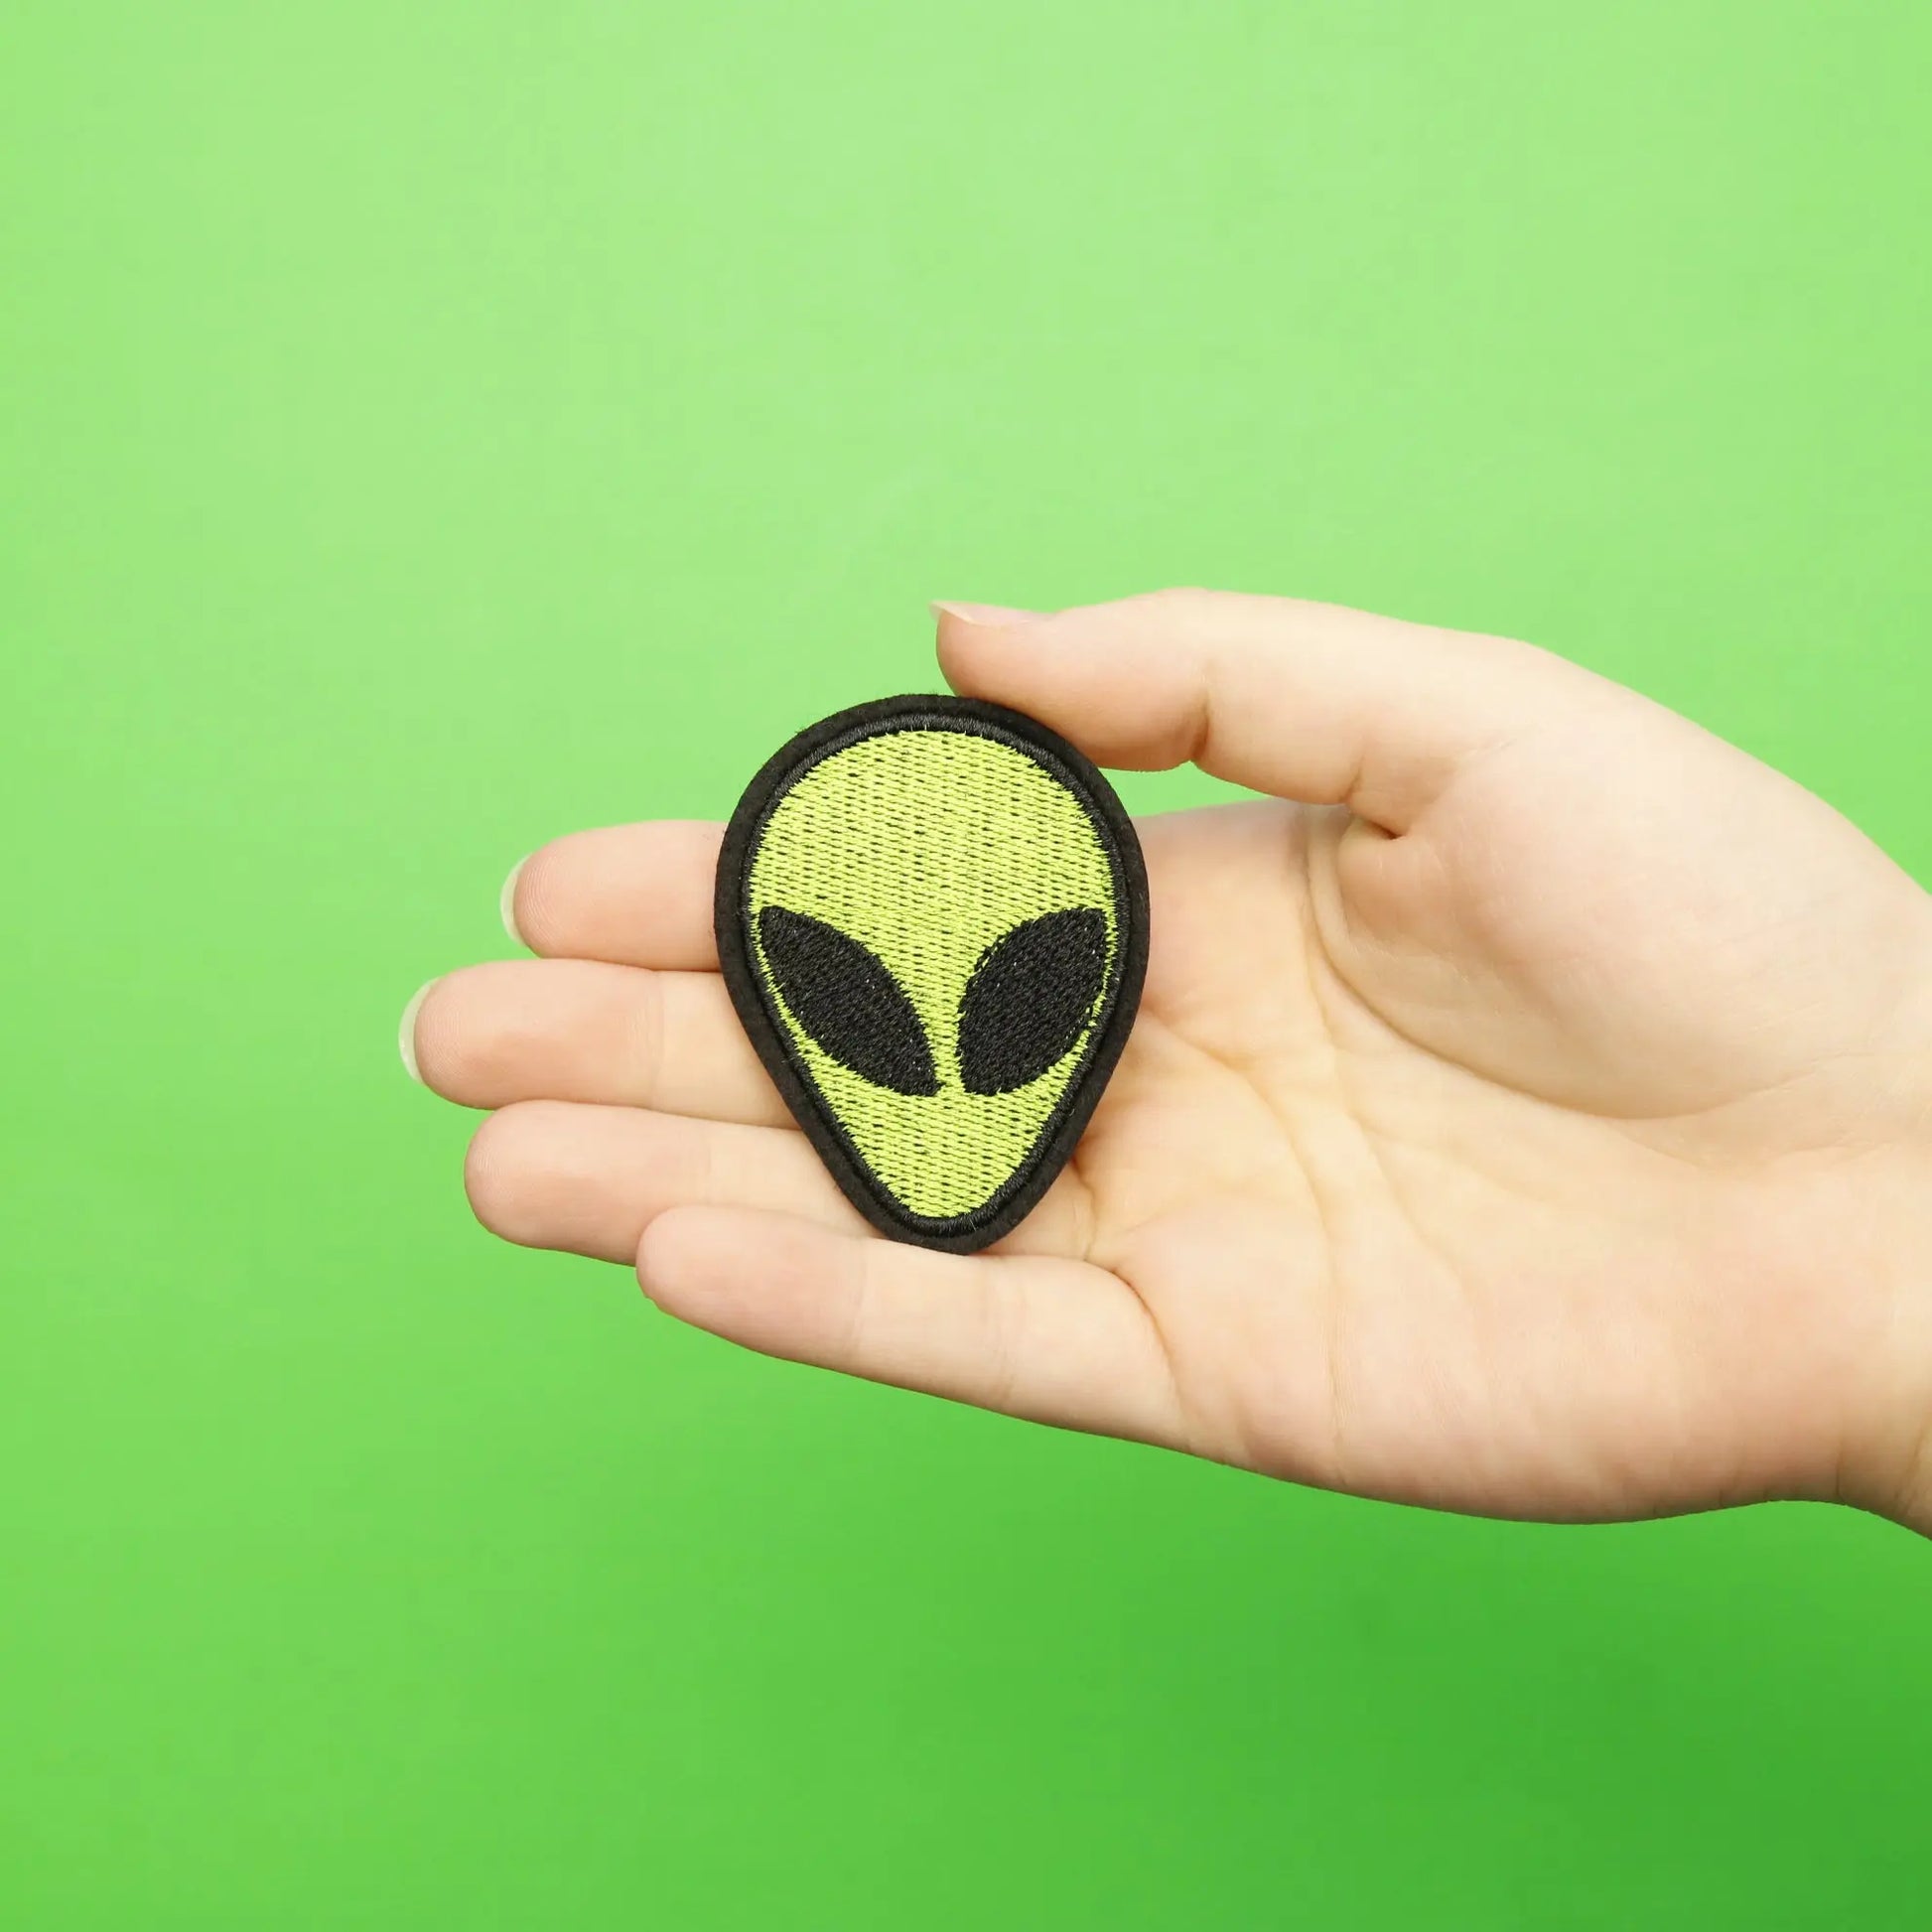 Small Green Alien Head Embroidered Iron On Patch 